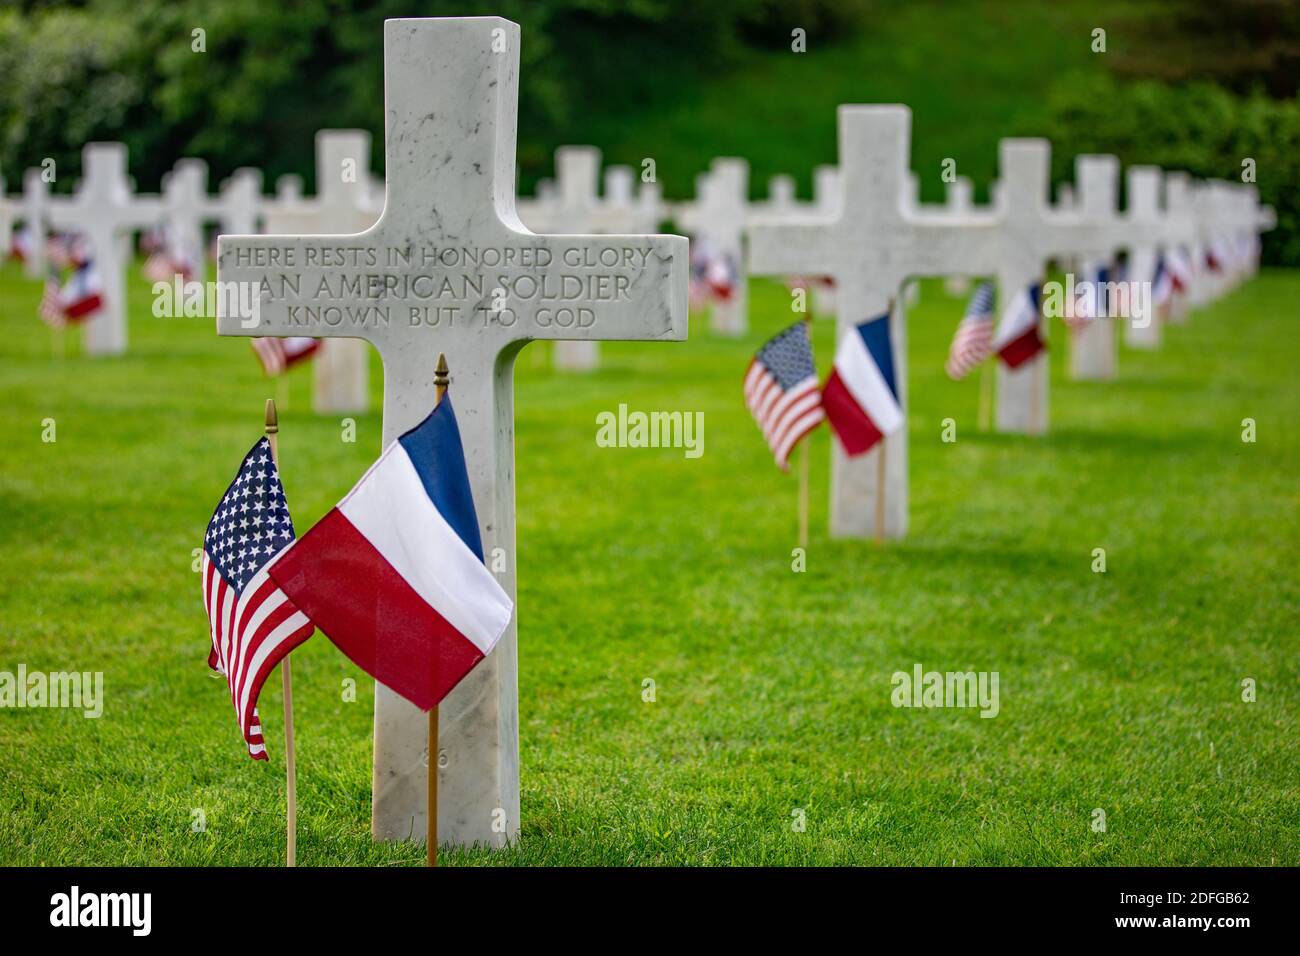 Hand out file photo dated May 26, 2019 of American and French flags wave in front of headstones at the Aisne-Marne Memorial near Belleau, France. The ceremony commemorated the 101st anniversary of the Battle of Belleau Wood, which marked the first occasion in World War I for U.S. forces to operate on a large scale against the German Army. President Trump reportedly skipped his scheduled visit to the Aisne-Marne American Cemetery near Paris in 2018 after dismissing the U.S. soldiers who died during the Battle of Belleau Wood as “losers.” According to a report in The Atlantic published Thursday, Stock Photo